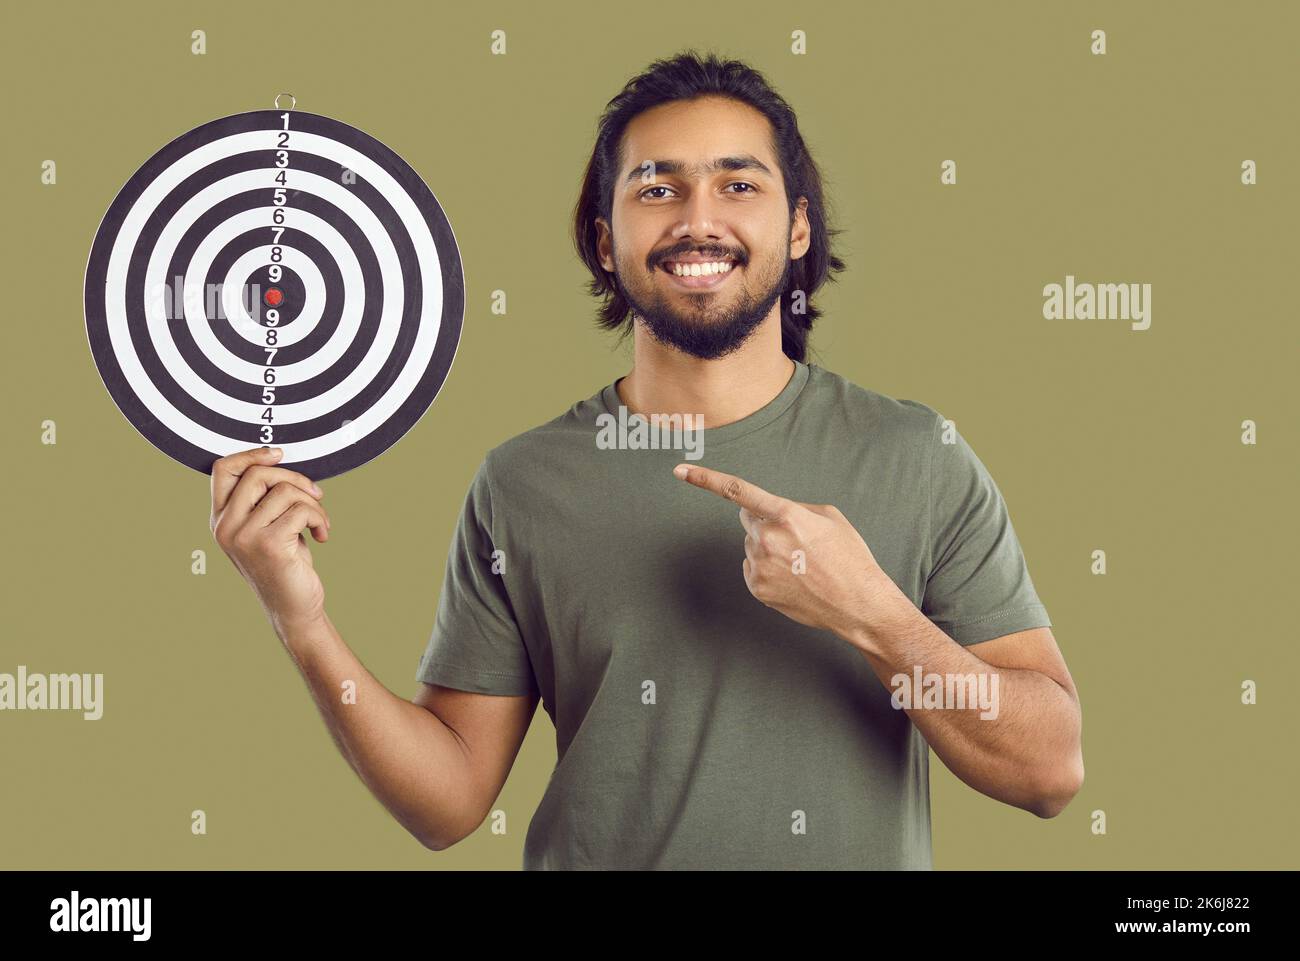 Happy Indian man setting goal, showing shooting target and pointing finger at bullseye Stock Photo